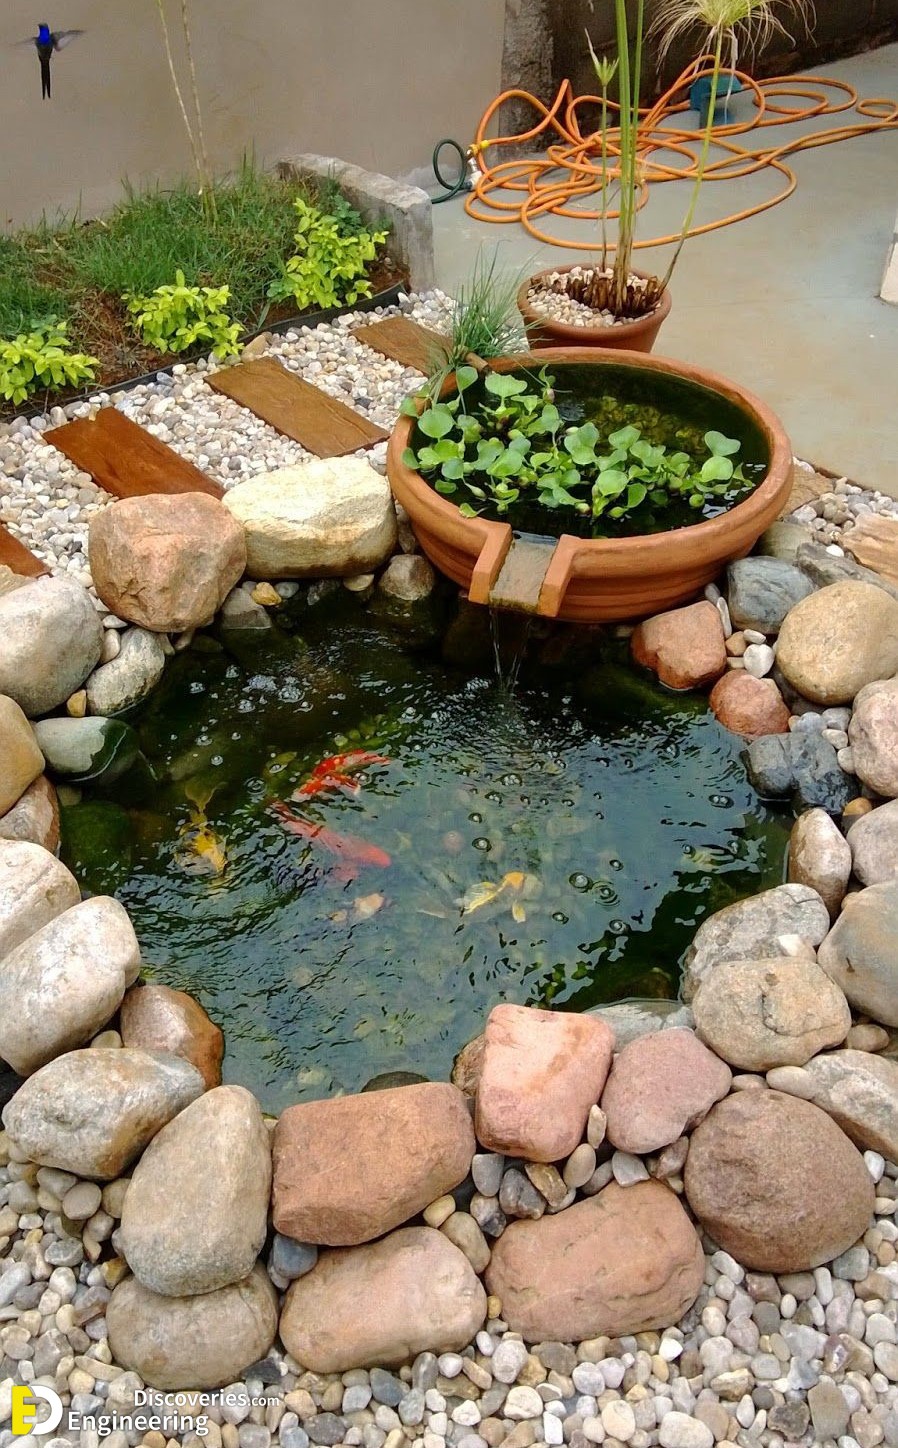 32 Small Pond Design Ideas For Gardens With Waterfalls  Engineering  Discoveries 32 Small Pond Design Ideas For Gardens With Waterfalls